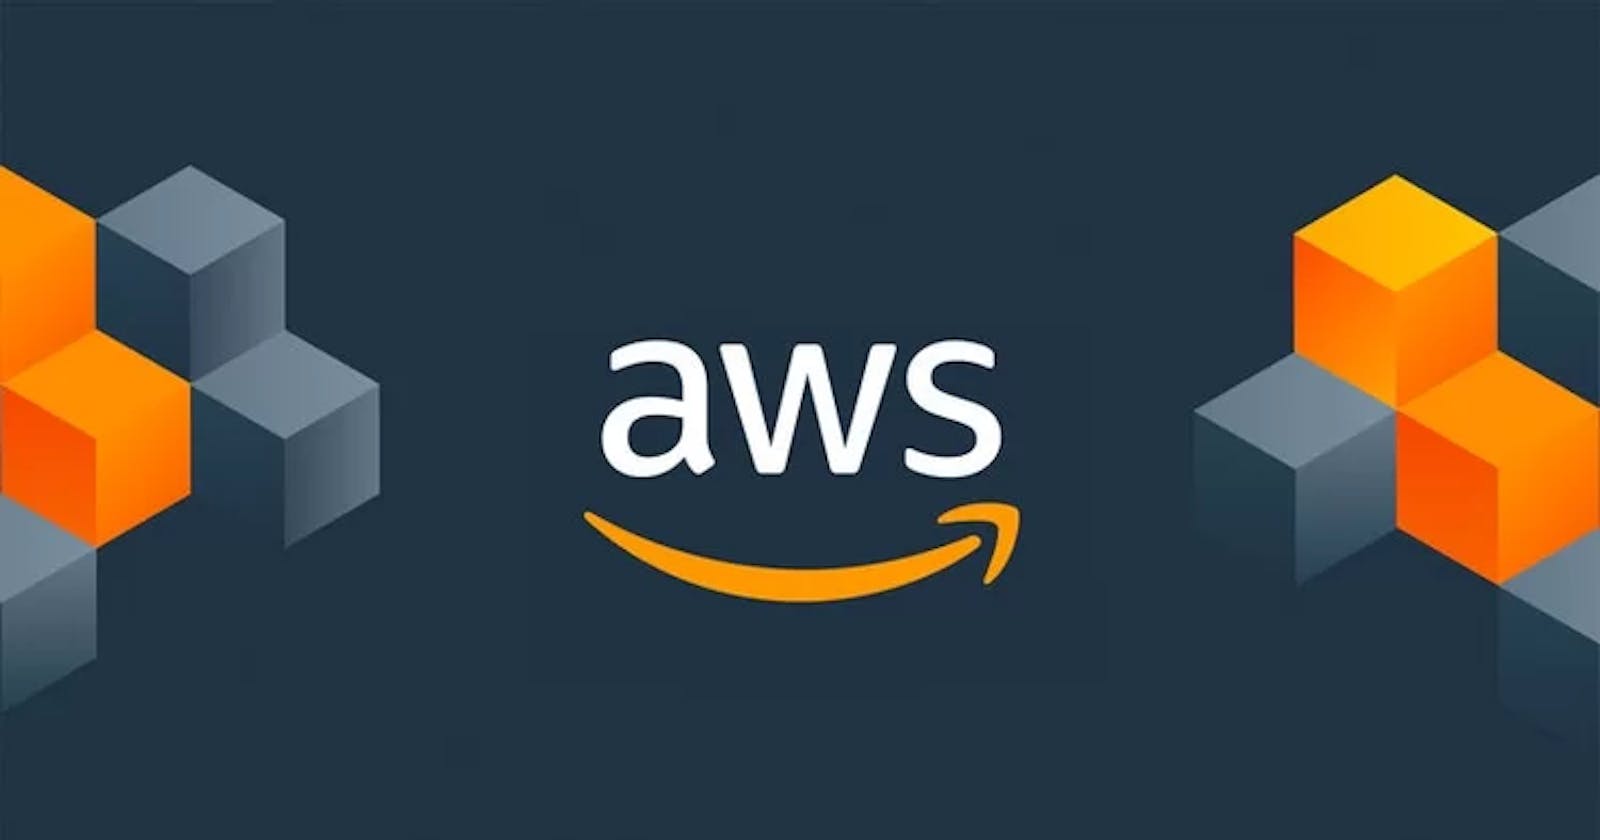 Step-by-step guide: Creating an EC2 Instance to Host your website on AWS